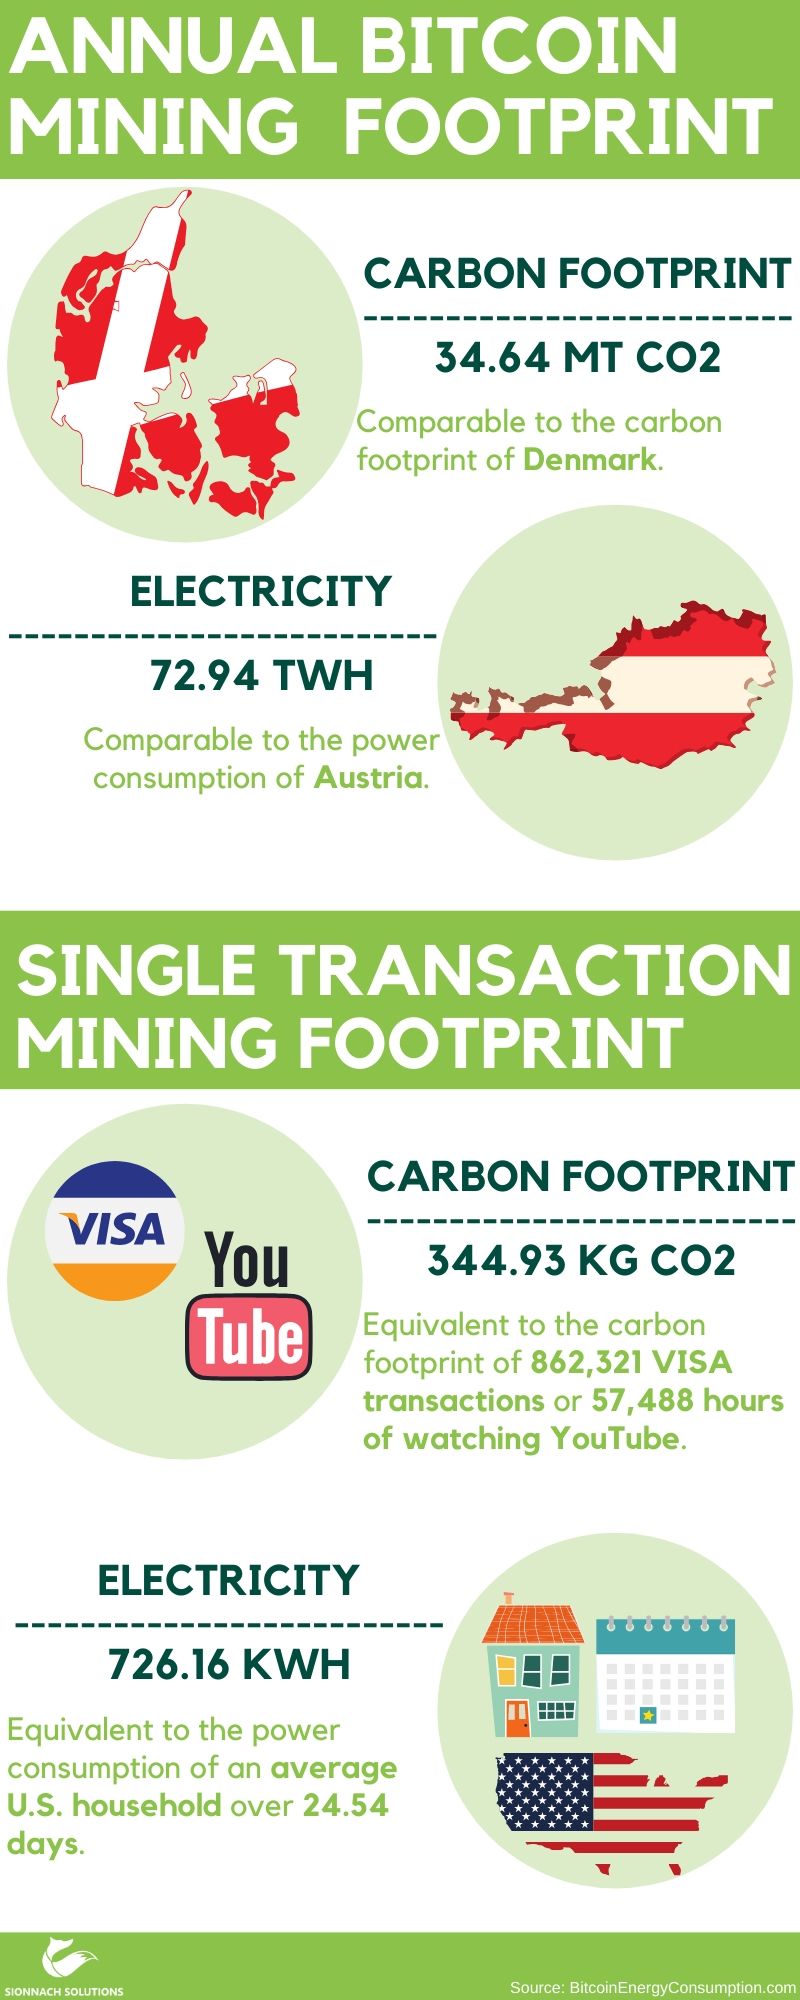 In 2020, the Bitcoin mining network is using an estimated circa 75 TeraWattHours of electricity annually. ANNUAL Bitcoin mining  FOOTPRINT; Carbon Footprint: 34.64 Mt CO2. Comparable to the carbon footprint of Denmark. Electrical Energy: 72.94 TWh. Comparable to the power consumption of Austria. Single Transaction mining FOOTPRINT; Carbon Footprint: 344.93 kg CO2. Equivalent to the carbon footprint of 862,321 VISA transactions or 57,488 hours of watching YouTube. Electrical Energy: 726.16 kWh. Equivalent to the power consumption of an average U.S. household over 24.54 days.